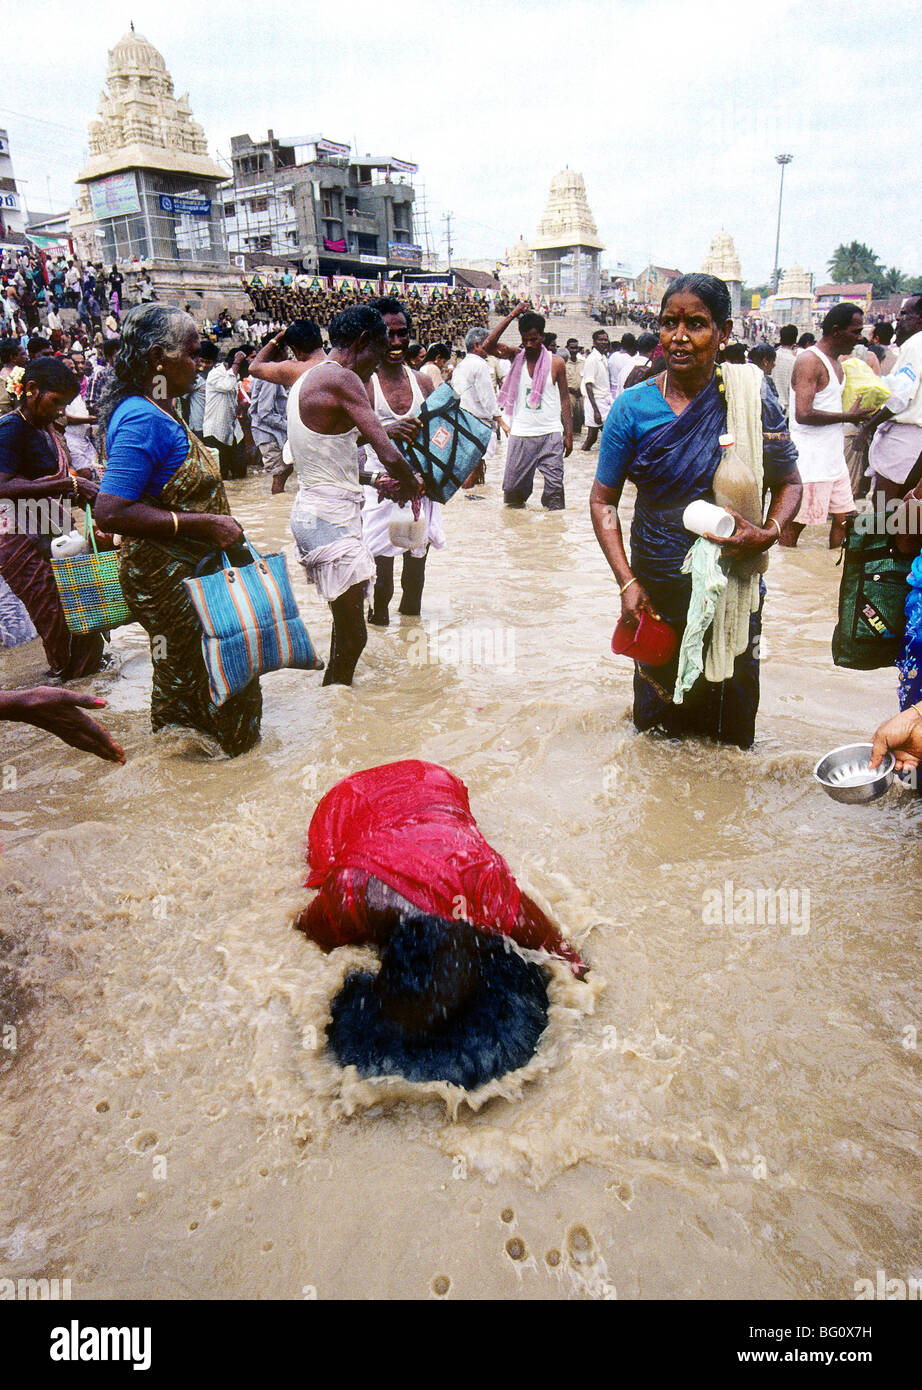 Pilgrims and devotees take a holy dip and splash water on one another in the Mahamaham temple tank during the Hindu Kumb Mela festival that is celebrated every 12 years in a small temple-town called Kumbakonam in the state of Tamil Nadu, India. It is believed that taking a bath or sprinkling water of the tank on their bodies will cleanse them of all their sins. This festival, called the Mahamaham festival, took place in March of 2004. Stock Photo